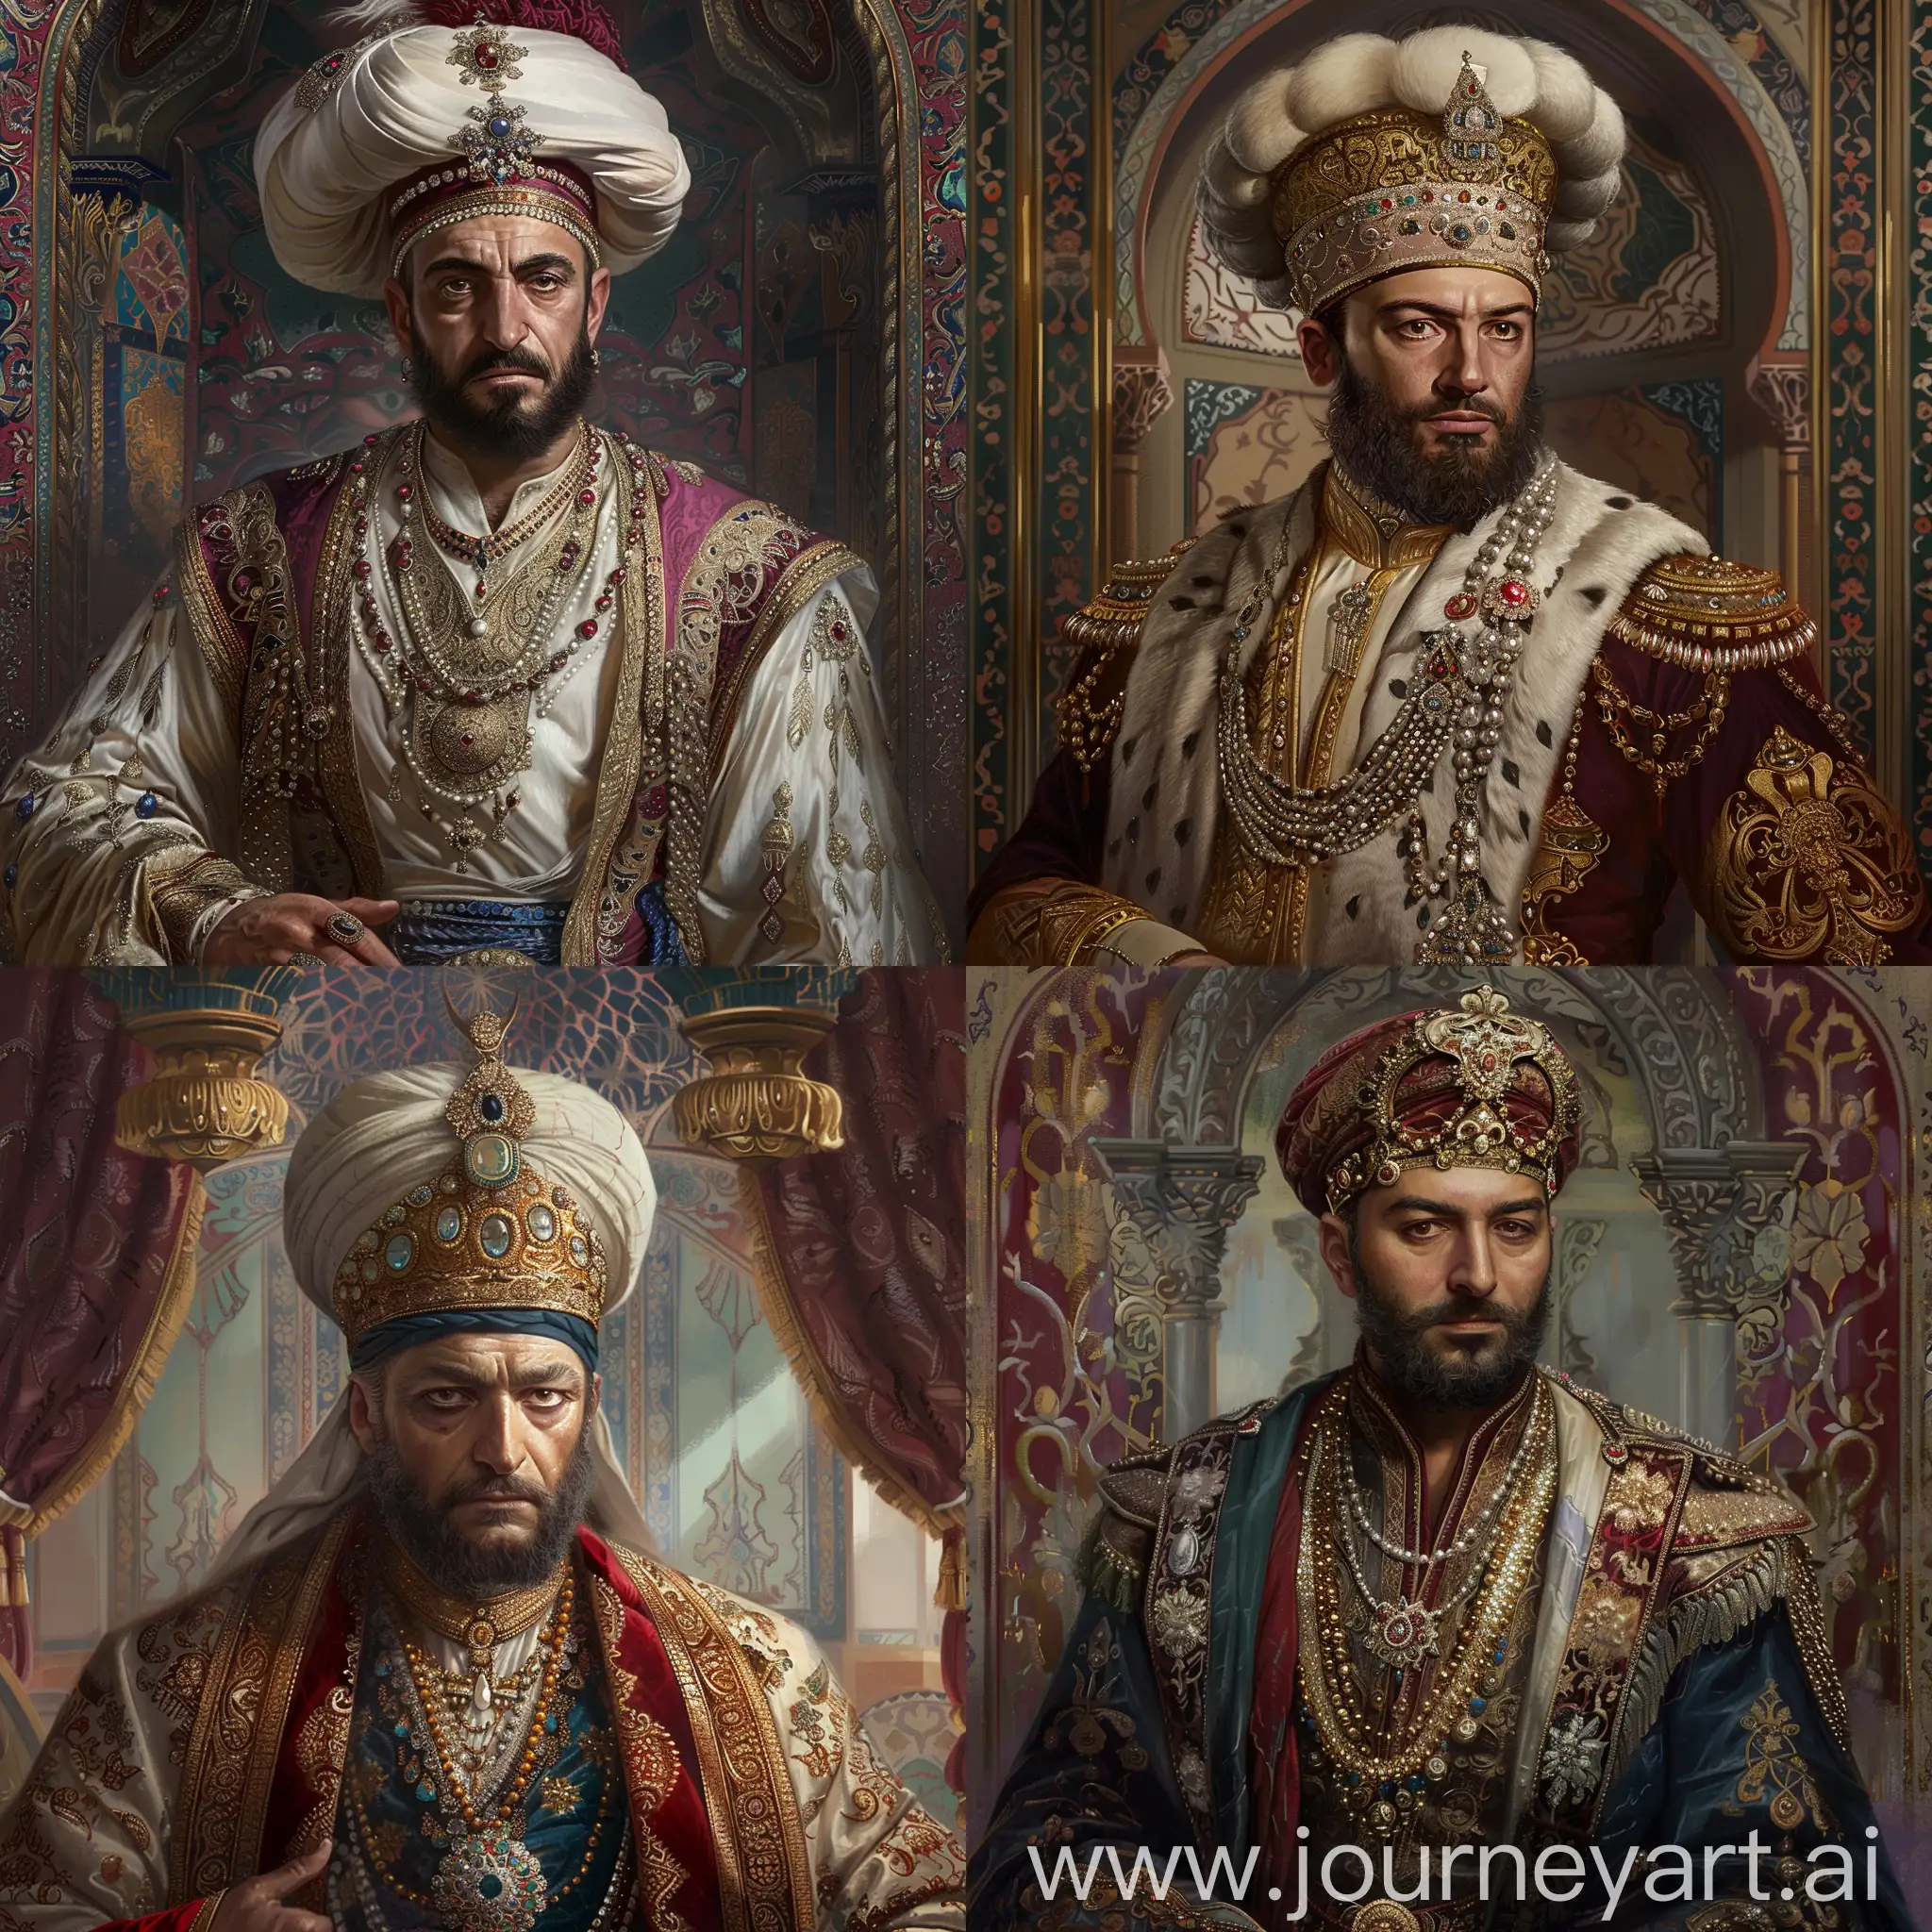 Create a portrait of Suleiman the Magnificent, the Ottoman Sultan, showcasing his power and sophistication. Depict him in luxurious attire, adorned with jewels and elaborate fabrics, to reflect his wealth and status. Capture his strong and confident gaze, conveying his intelligence and leadership qualities. Include symbols of Ottoman culture and influence, such as intricate patterns and architectural elements from the era. Surround him with a sense of opulence, using rich colors and textures to convey the grandeur of his reign.